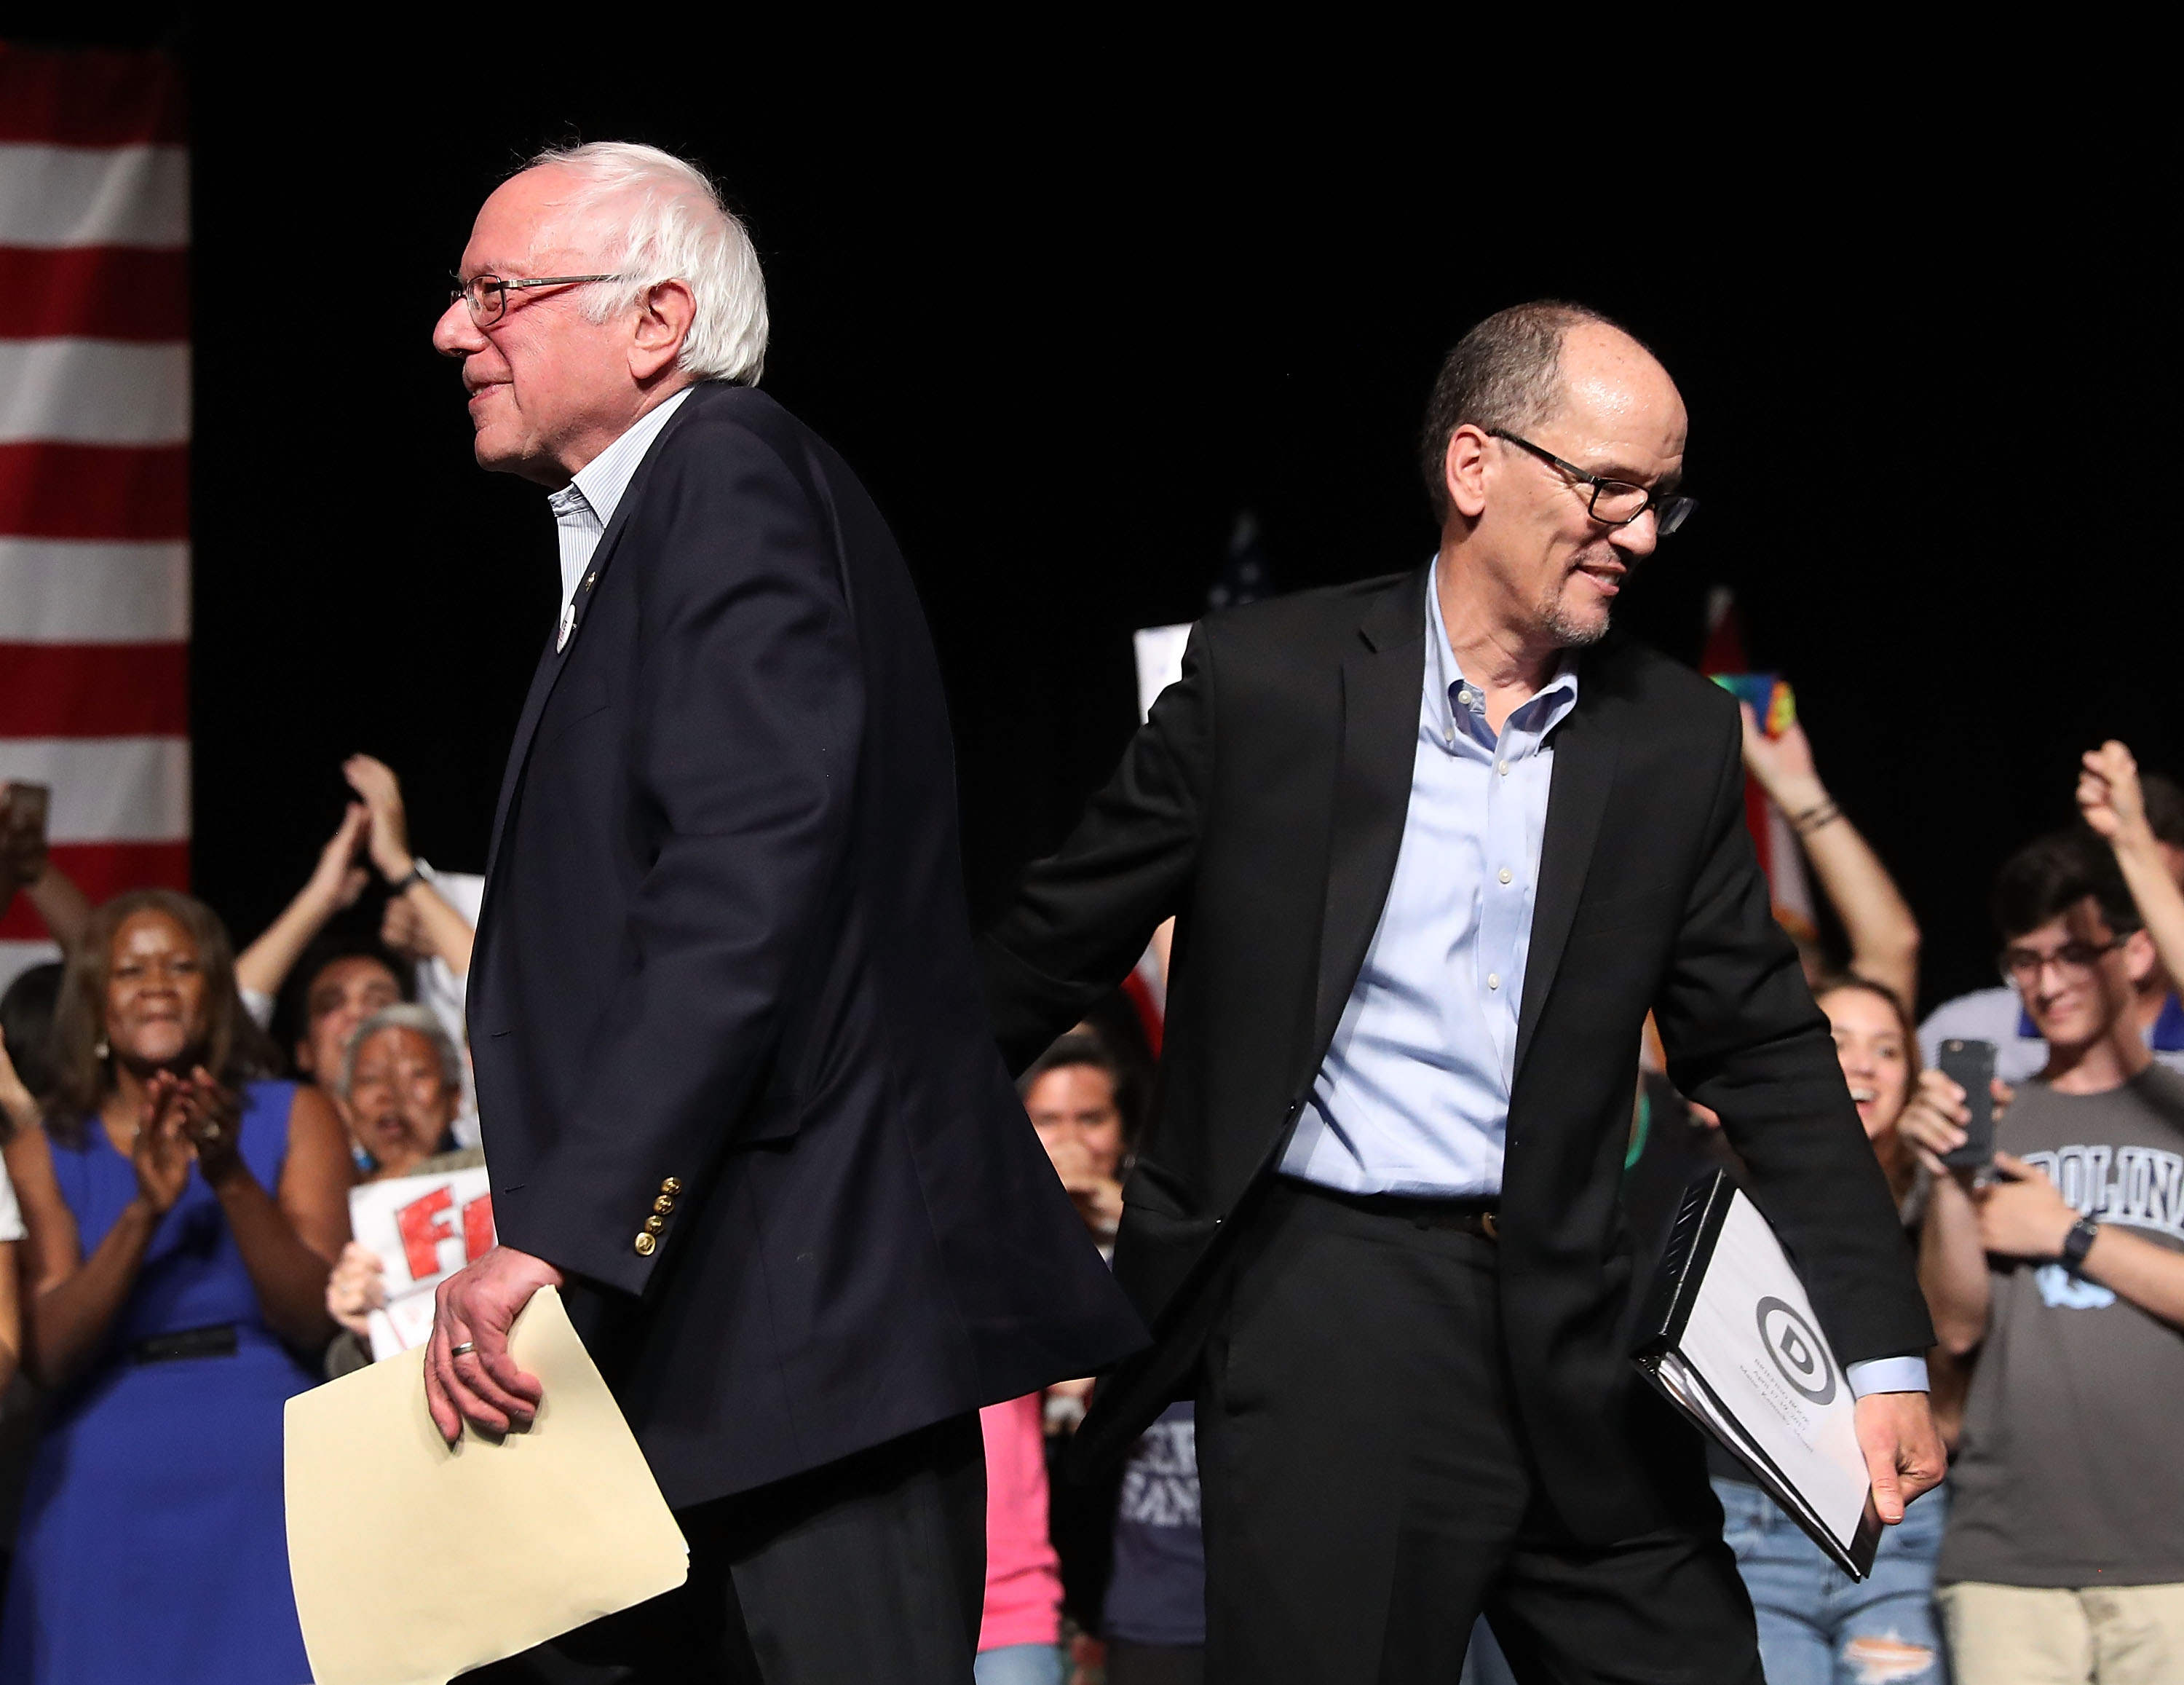 Sen. Bernie Sanders (I-VT) and DNC Chair Tom Perez walk past each other as Sen. Sanders takes to the stage to speak during their "Come Together and Fight Back" tour at the James L Knight Center on April 19, 2017 in Miami, Florida. (Joe Raedle&mdash;Getty Images)